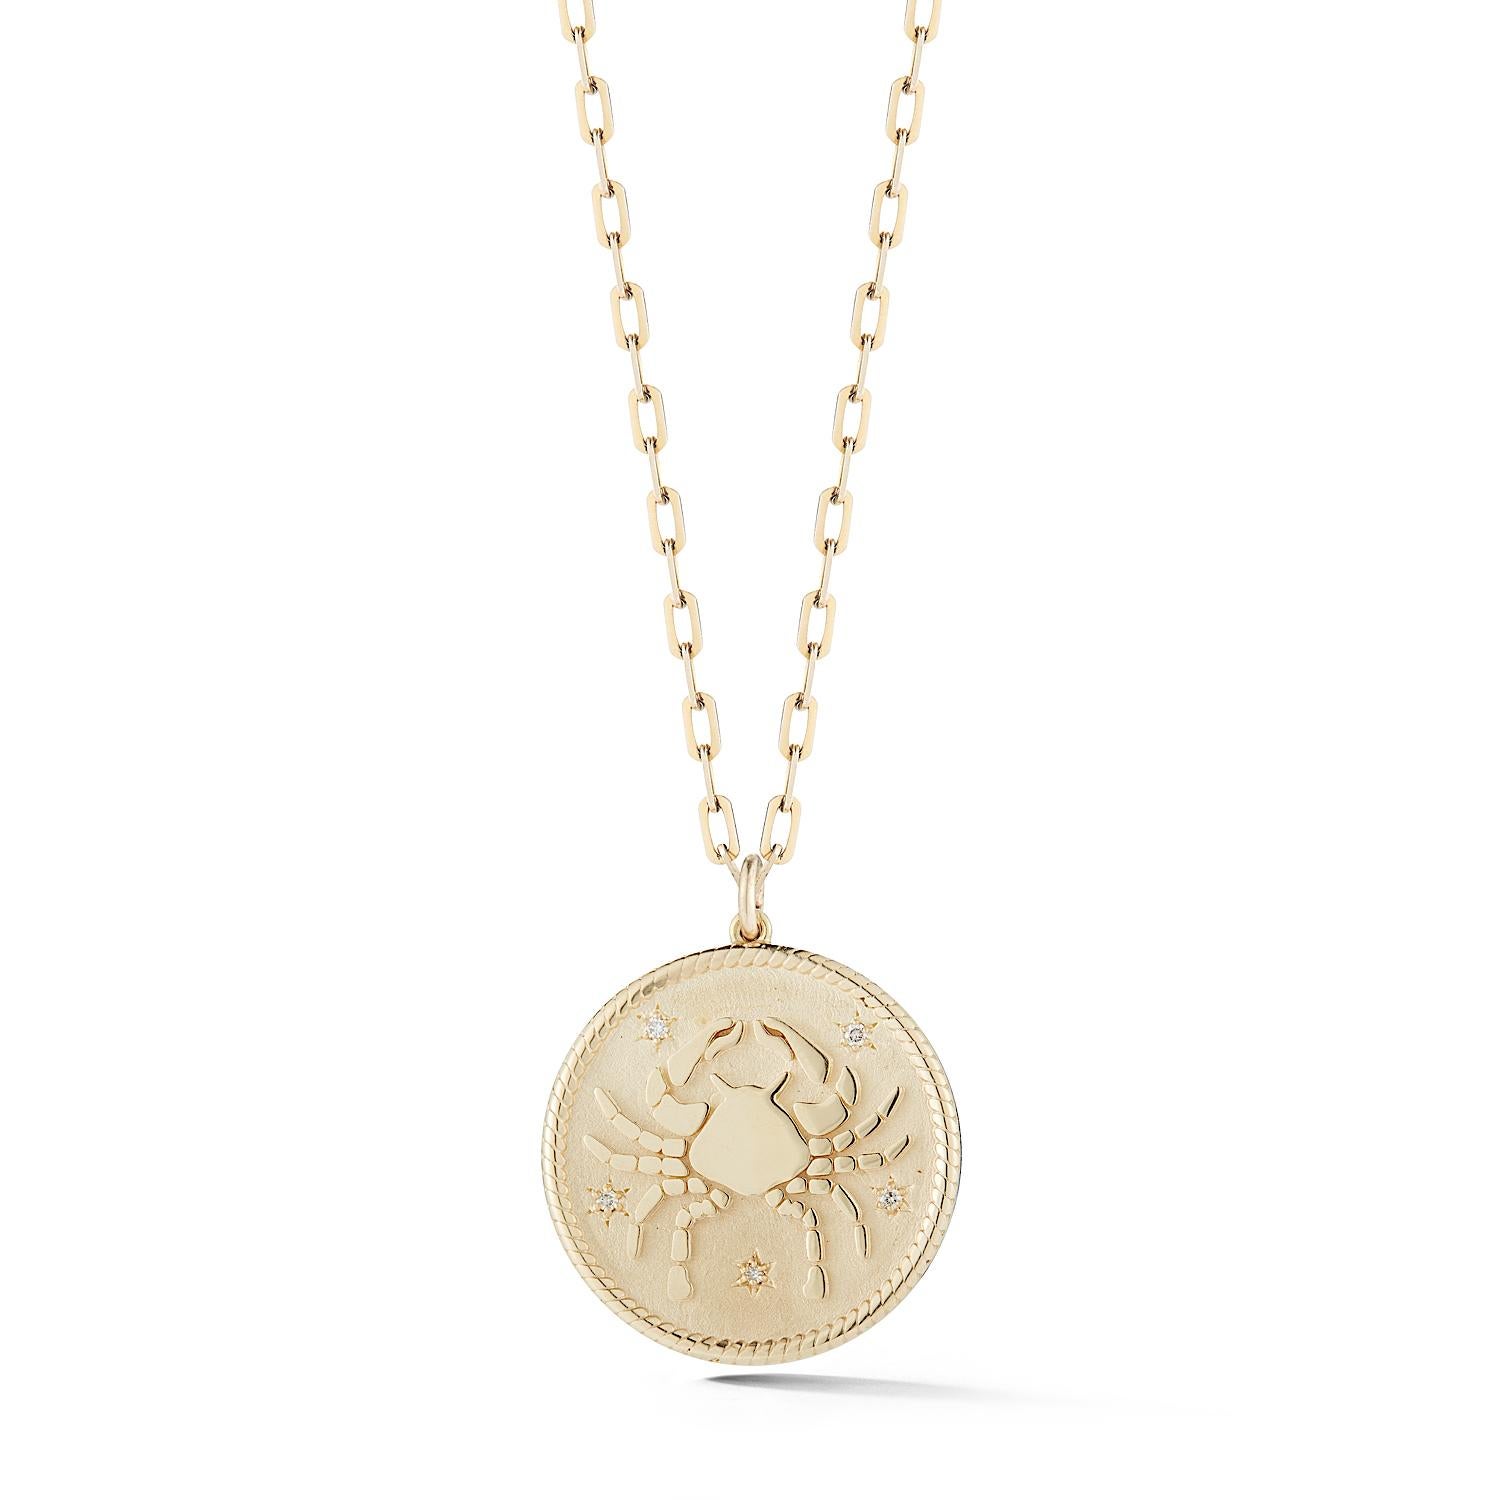 Garland Collection Diamond and Gold Pisces Zodiac Medallion For Sale 9